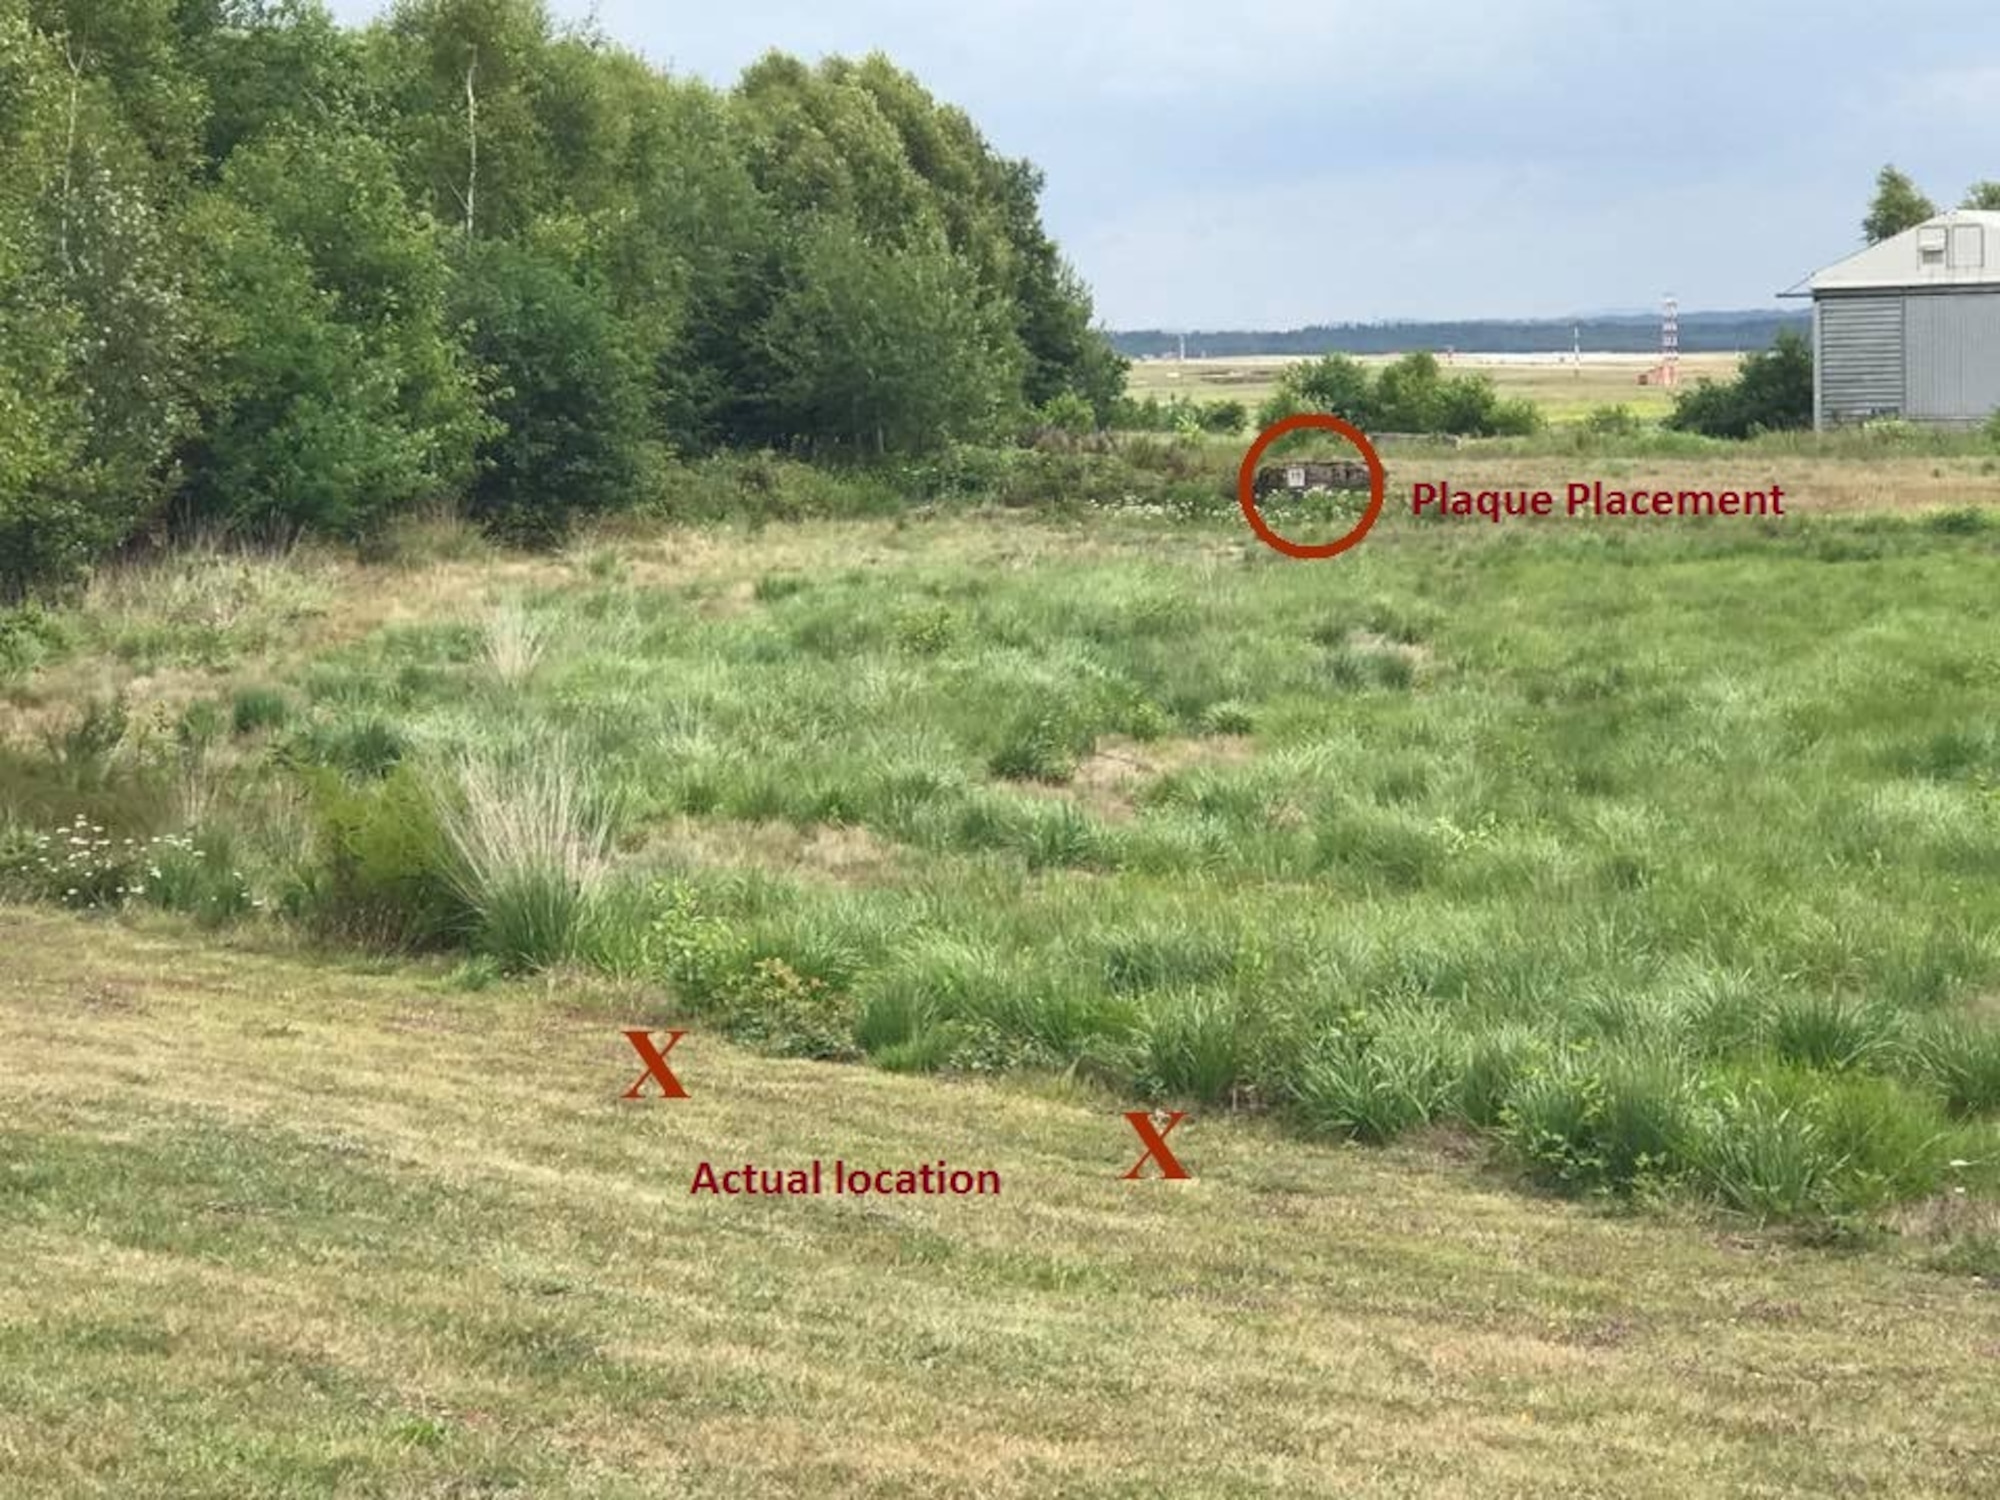 Location today that marks the spot near Ramstein Air Base where Royal Air Force Squadron leader Roger Bushell and French Air Force 2nd Lt. Bernad Scheidhauer were executed on March 29, 1944.  A second marker was placed approximately 70 yards to the rear of the execution site. (Courtesy photo by Dr. Silvano Wueschner, Air University historian)